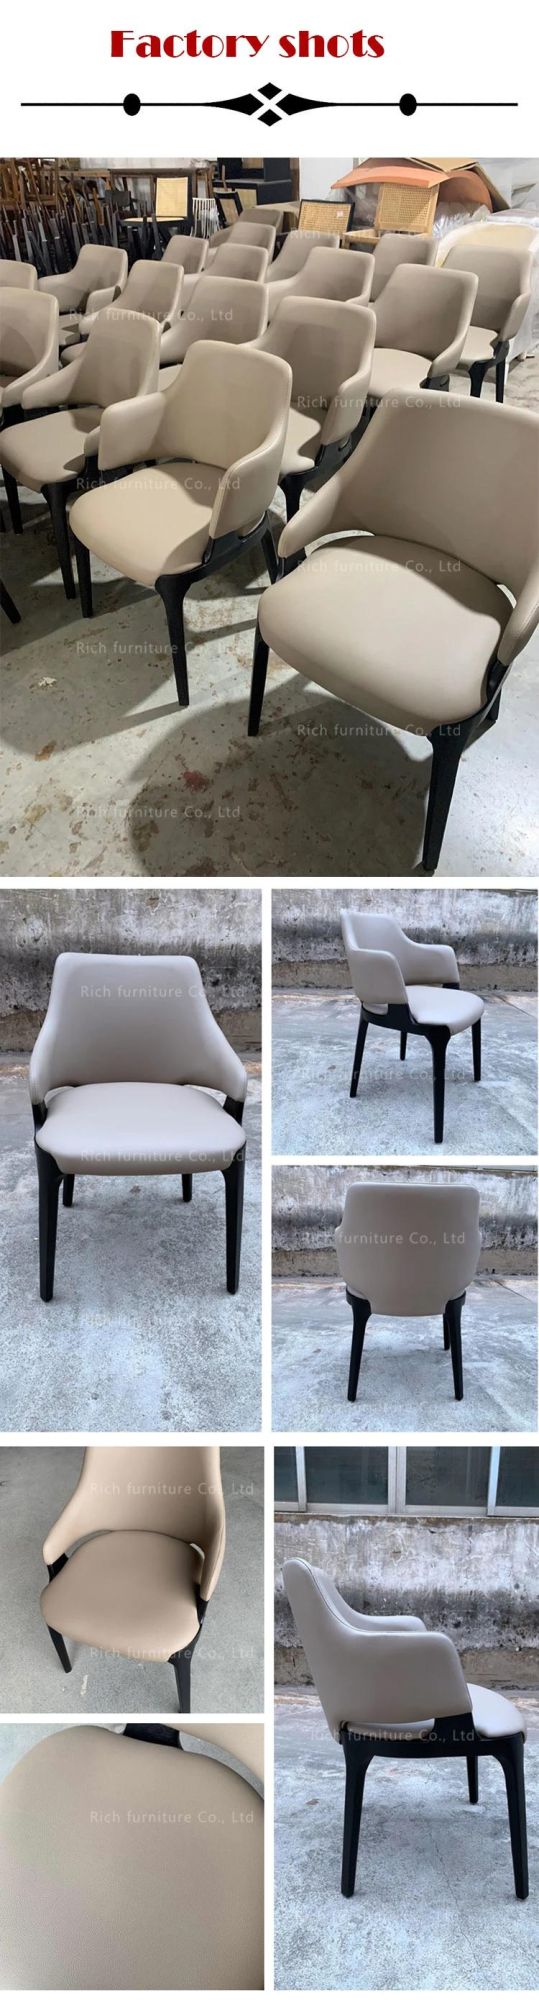 Commercial Restaurants and Cafe Chairs Hotel Used Modern Dinner Chairs for Dining Faux Leather Dining Chairs